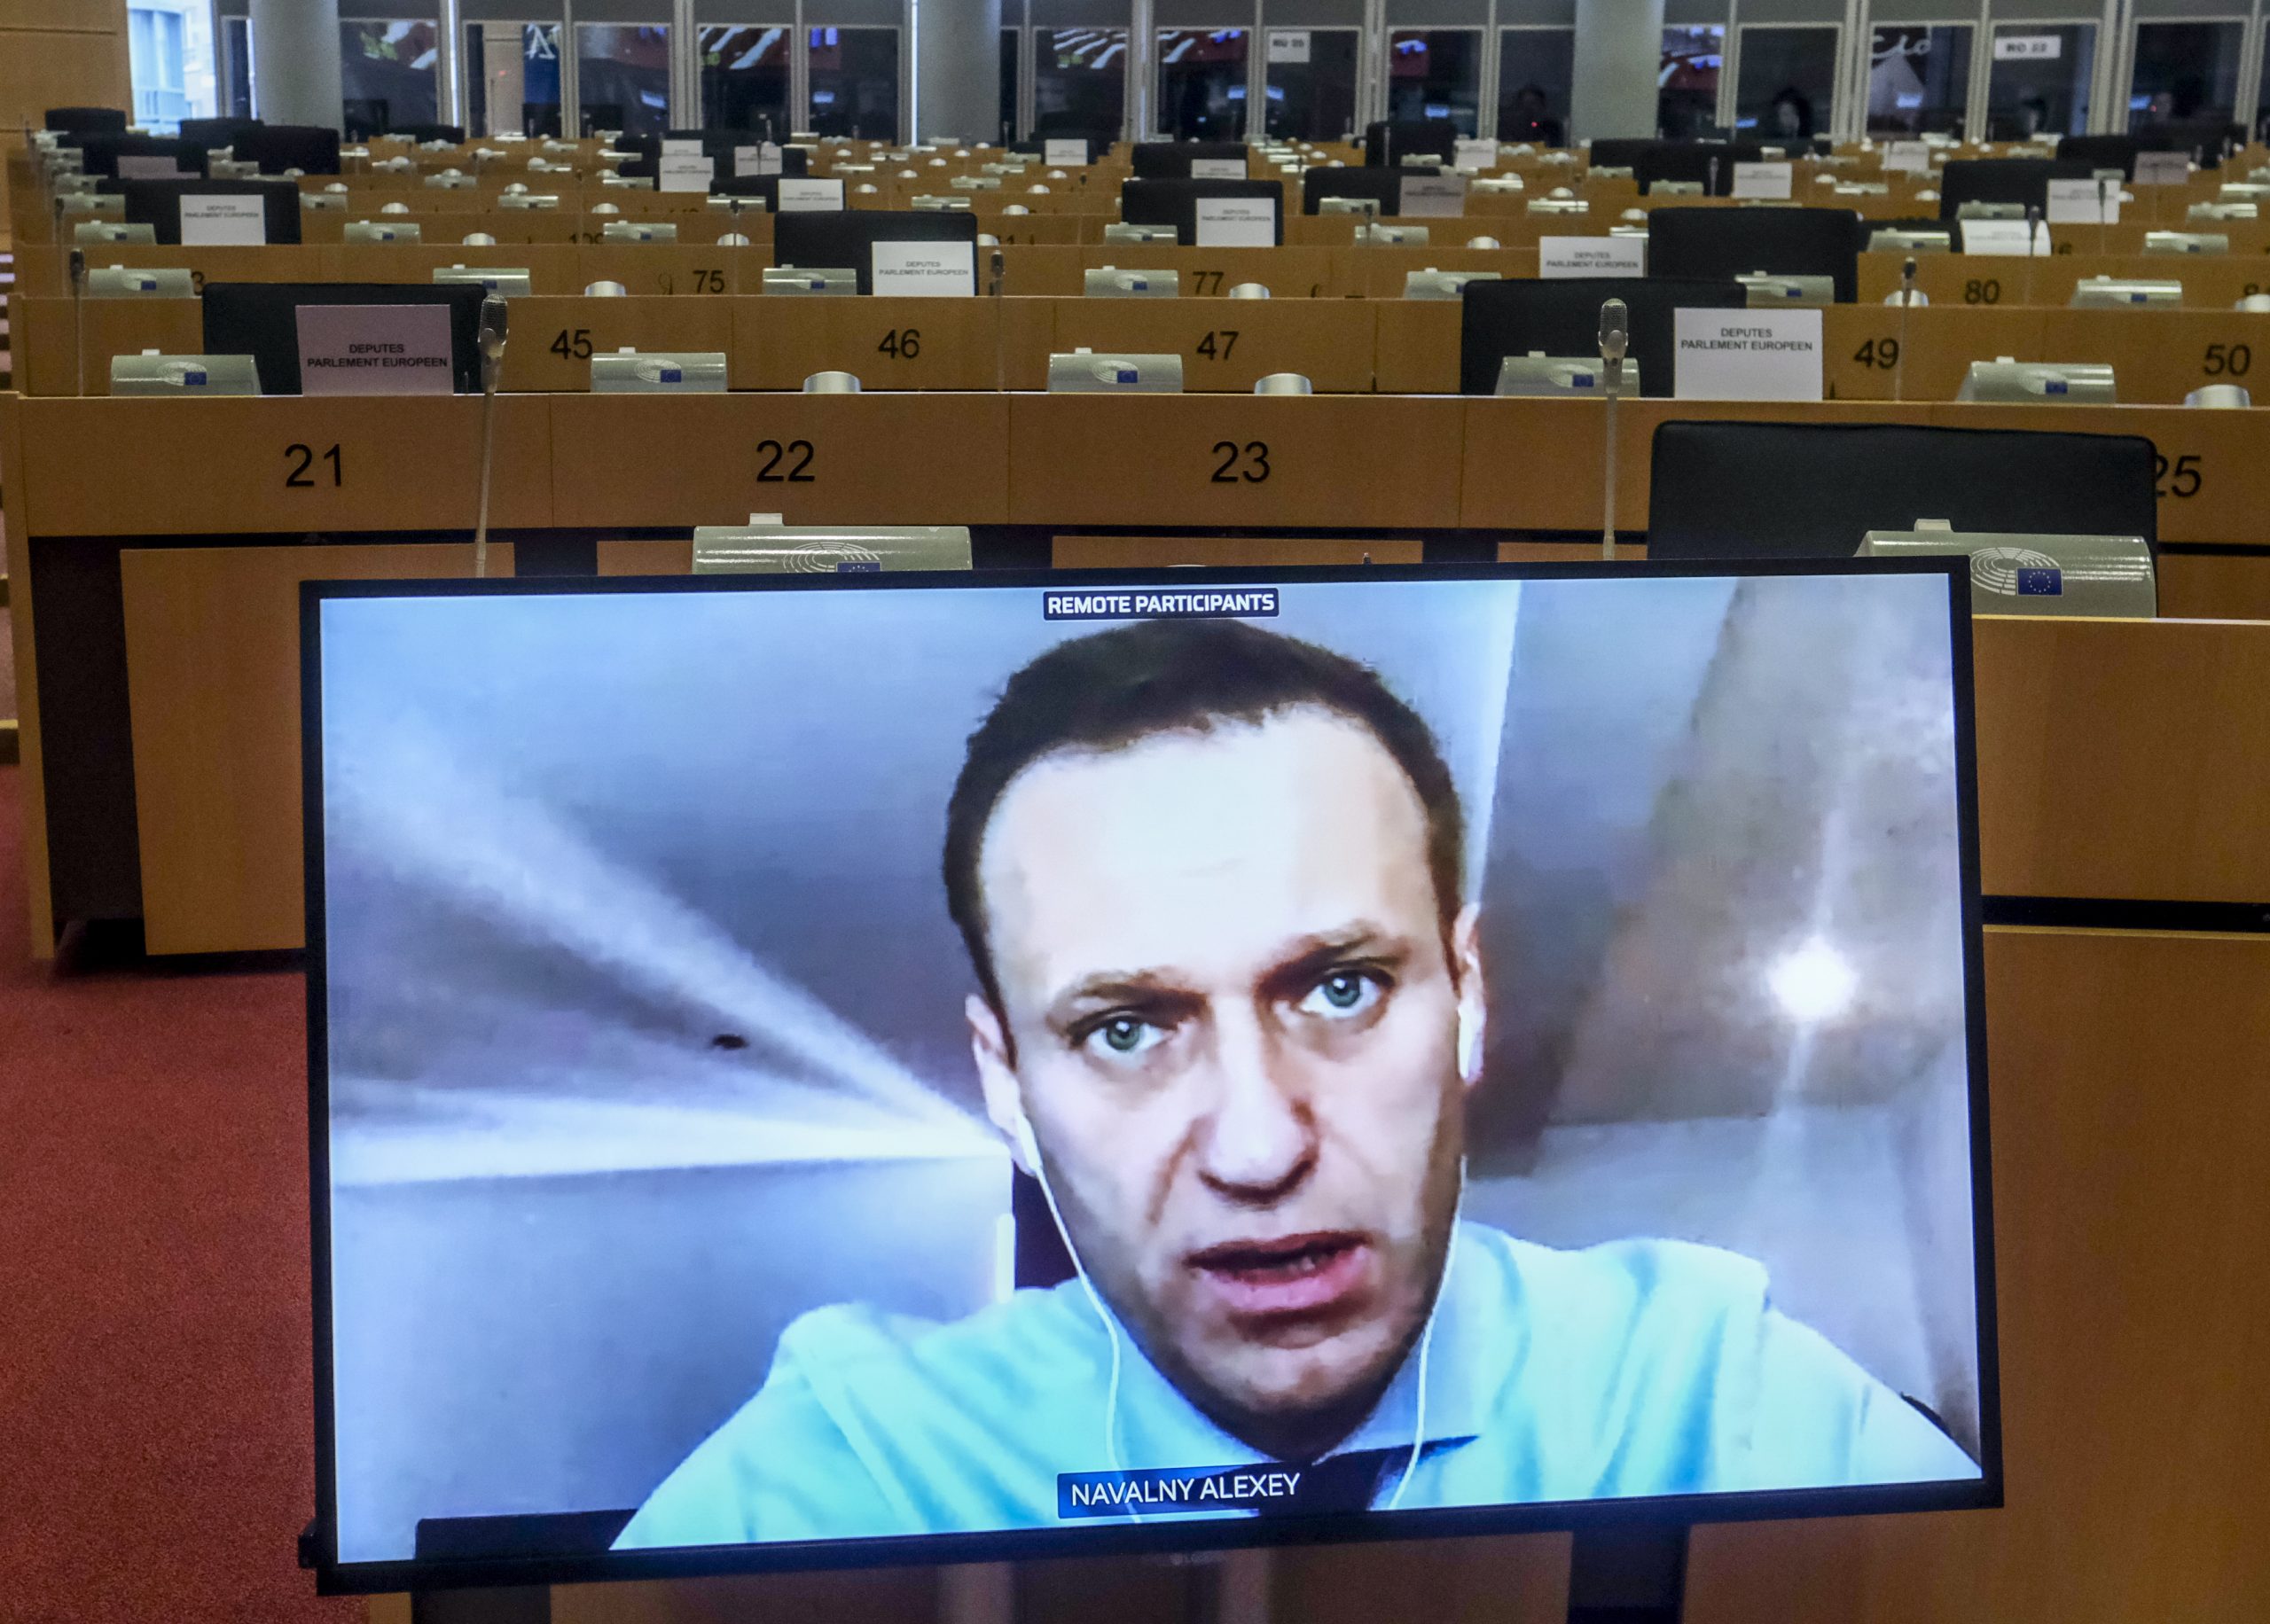 epa08845542 Russian opposition leader Alexey Navalny takes part at a video hearing by European Parliament Foreign Affairs committee in Brussels, Belgium, 27 November 2020. On 17 September 2020, the European Parliament adopted a resolution that strongly condemned the assassination attempt on Alexei Navalny. The parliament noted that the poison used, belonging to the 'Novichok group', could only be developed in state-owned military laboratories and not by private individuals, which strongly suggests that Russian authorities were behind the attack.  EPA/OLIVIER HOSLET